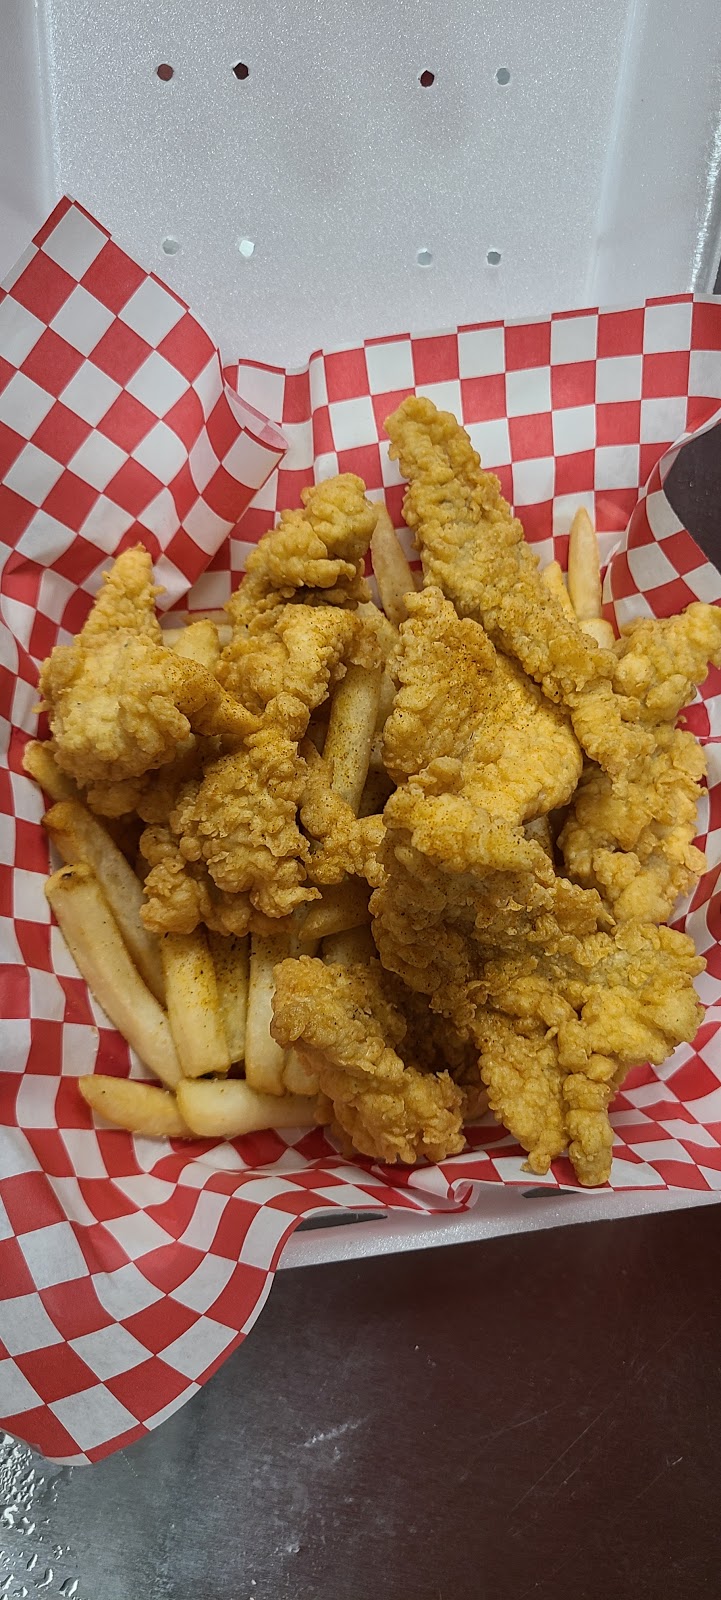 Crabbys Cajun | meal takeaway | 1115 Assembly St, Columbia, SC 29201, USA | 8035427100 OR +1 803-542-7100